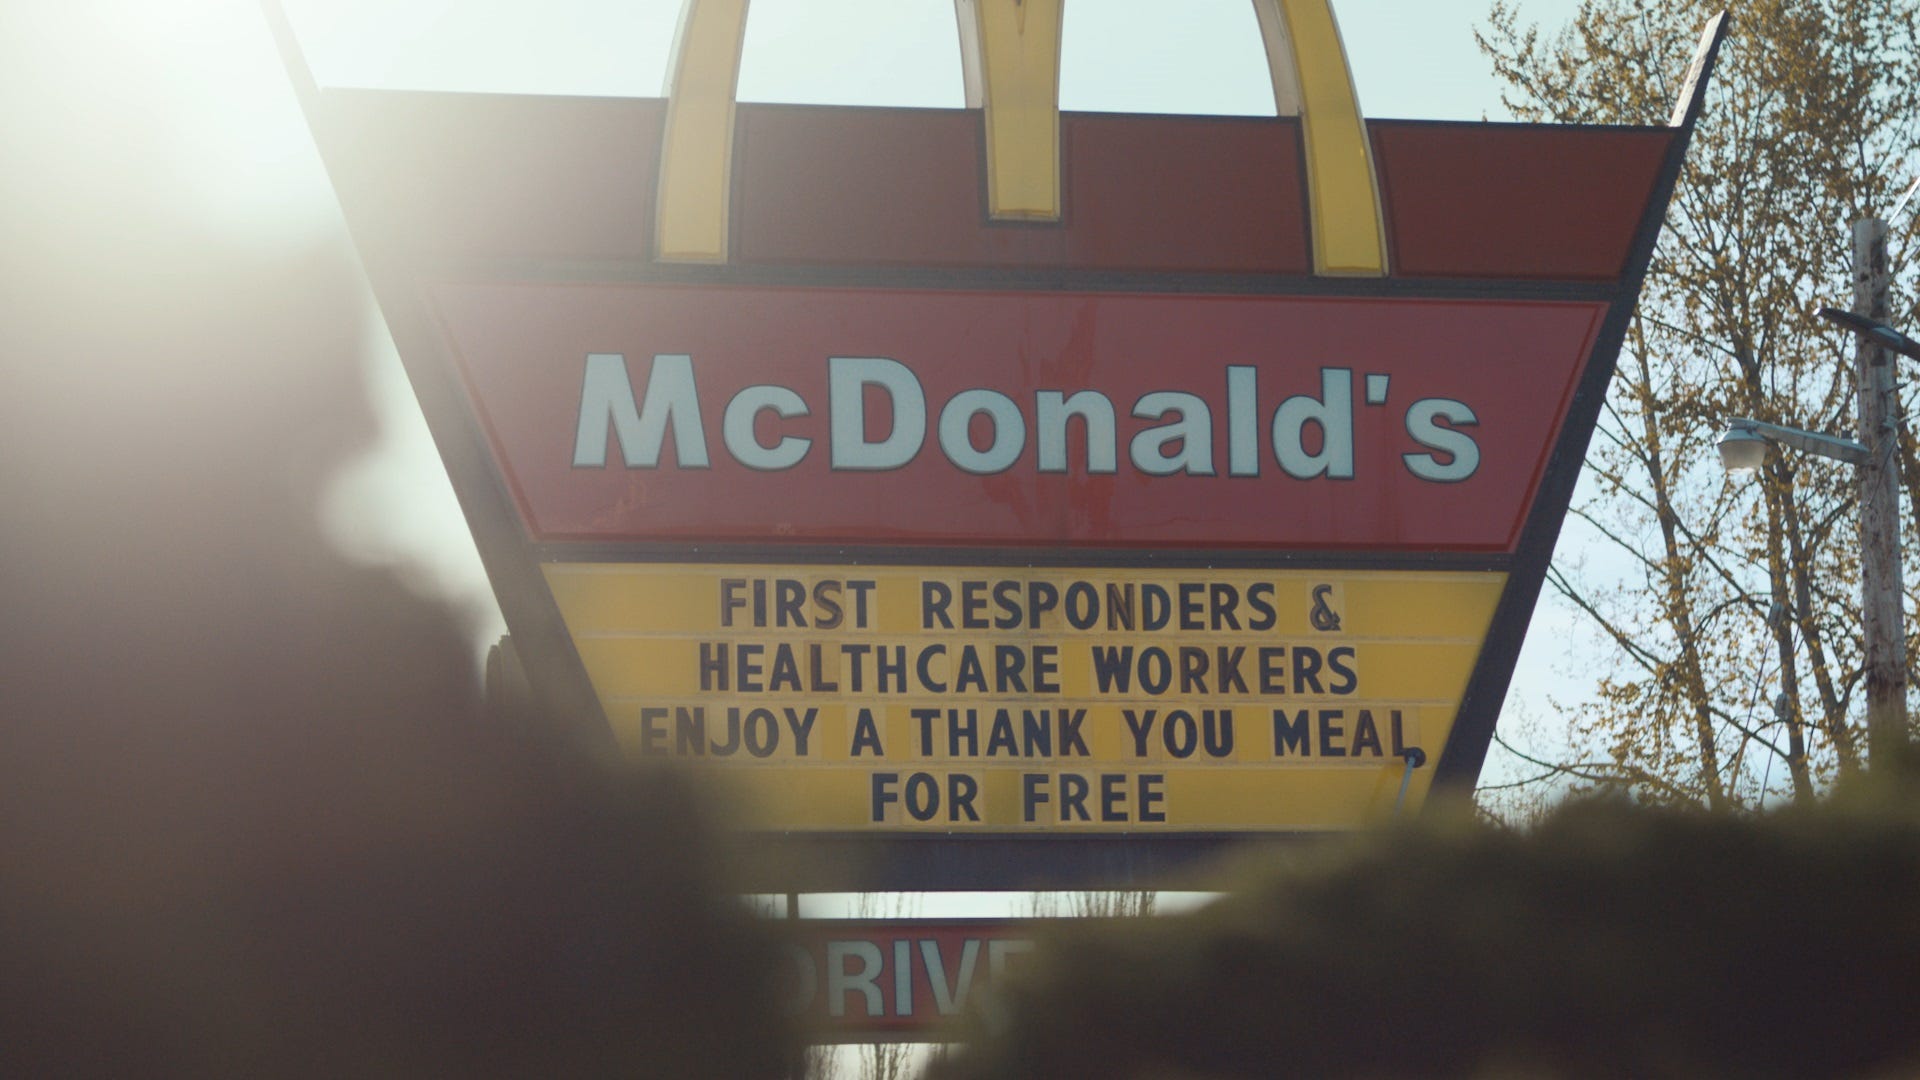 McDonalds' introduces new Thank You meal for healthcare workers